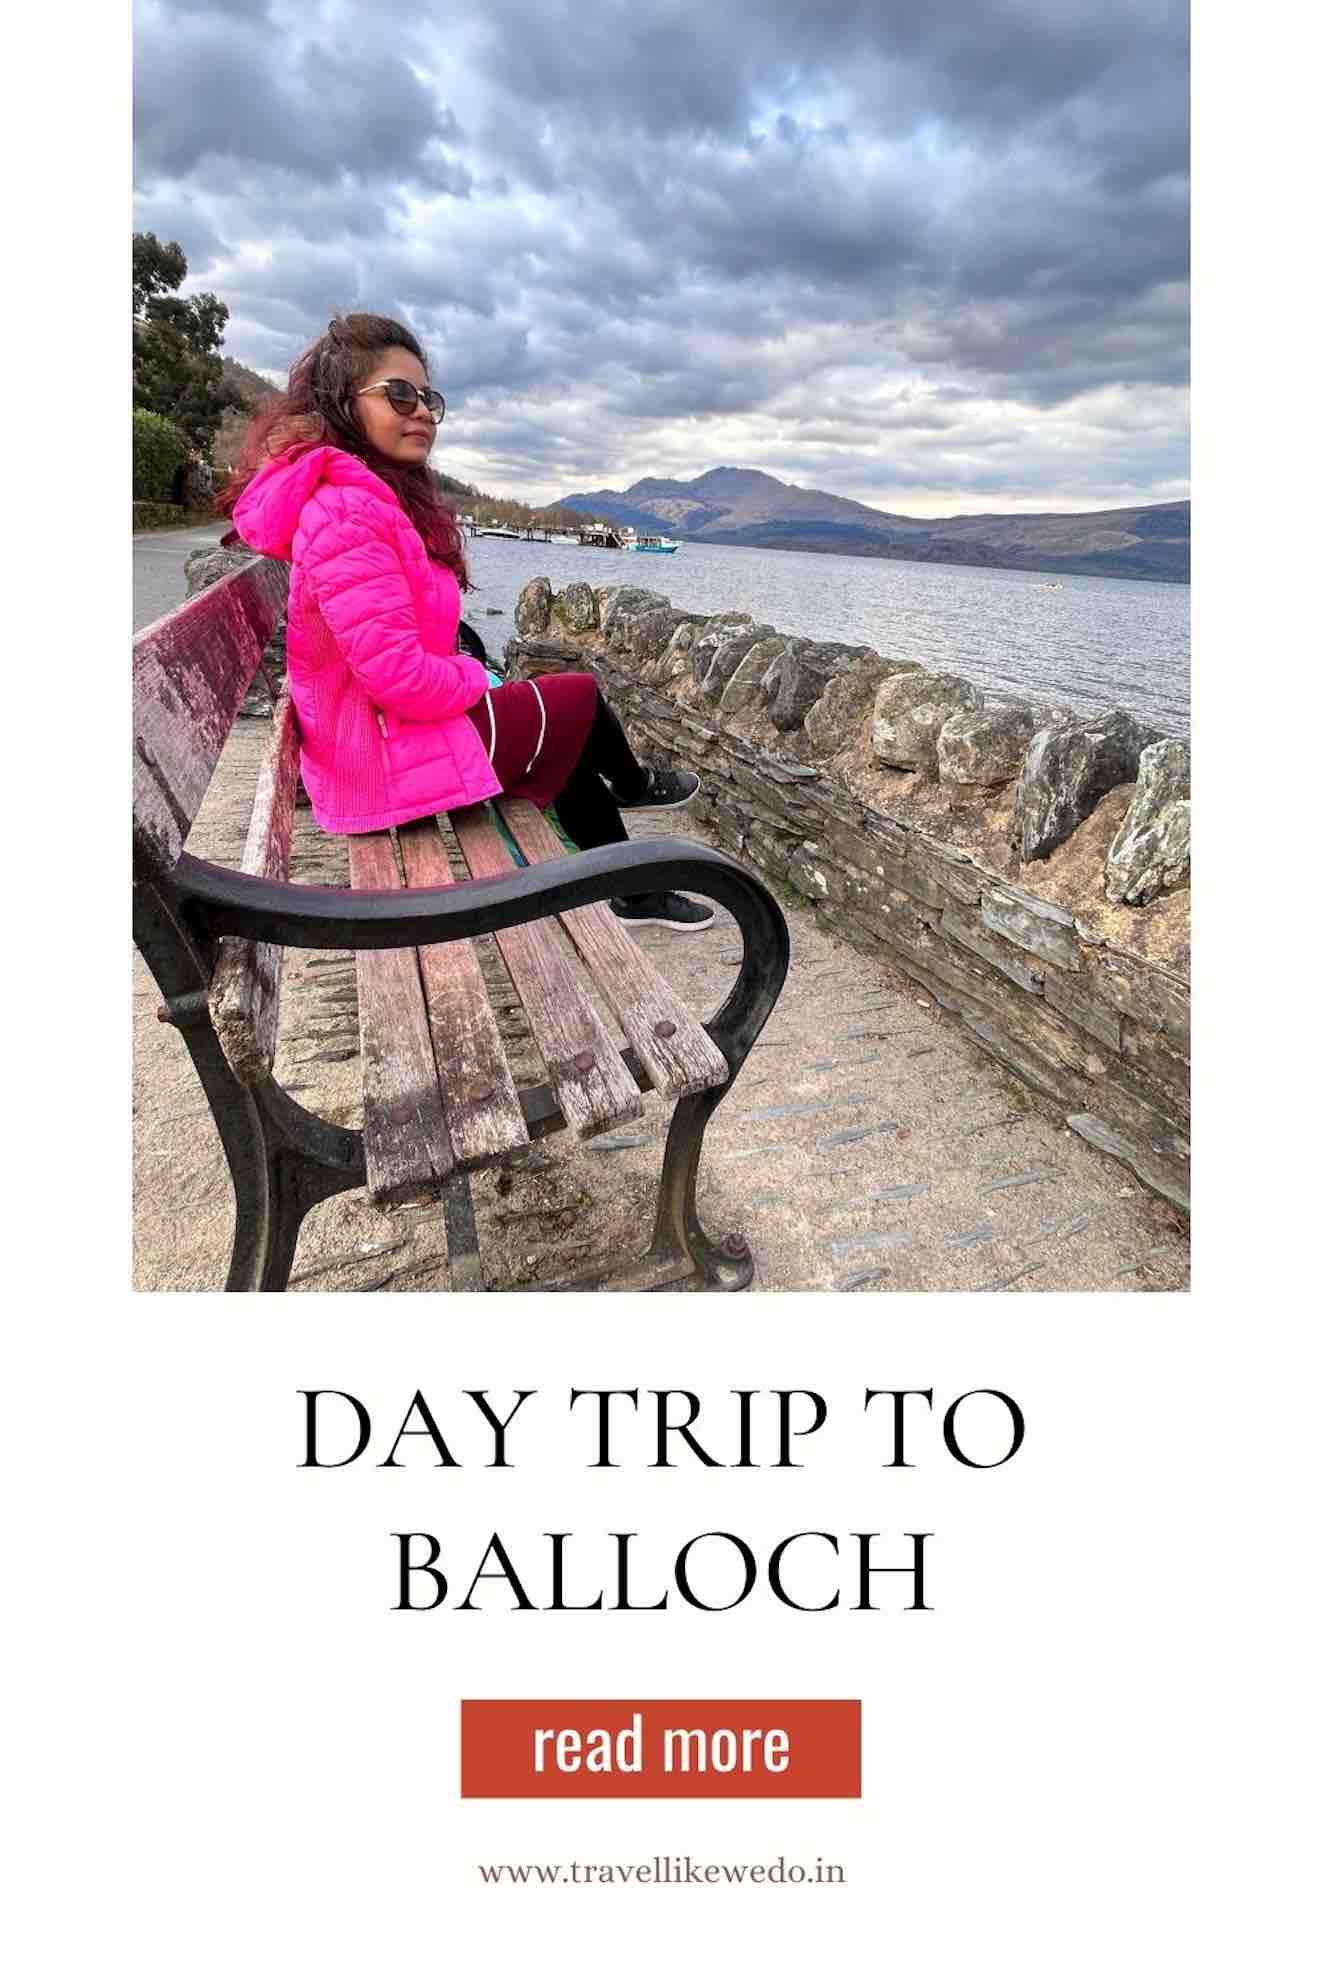 Day trip to Balloch